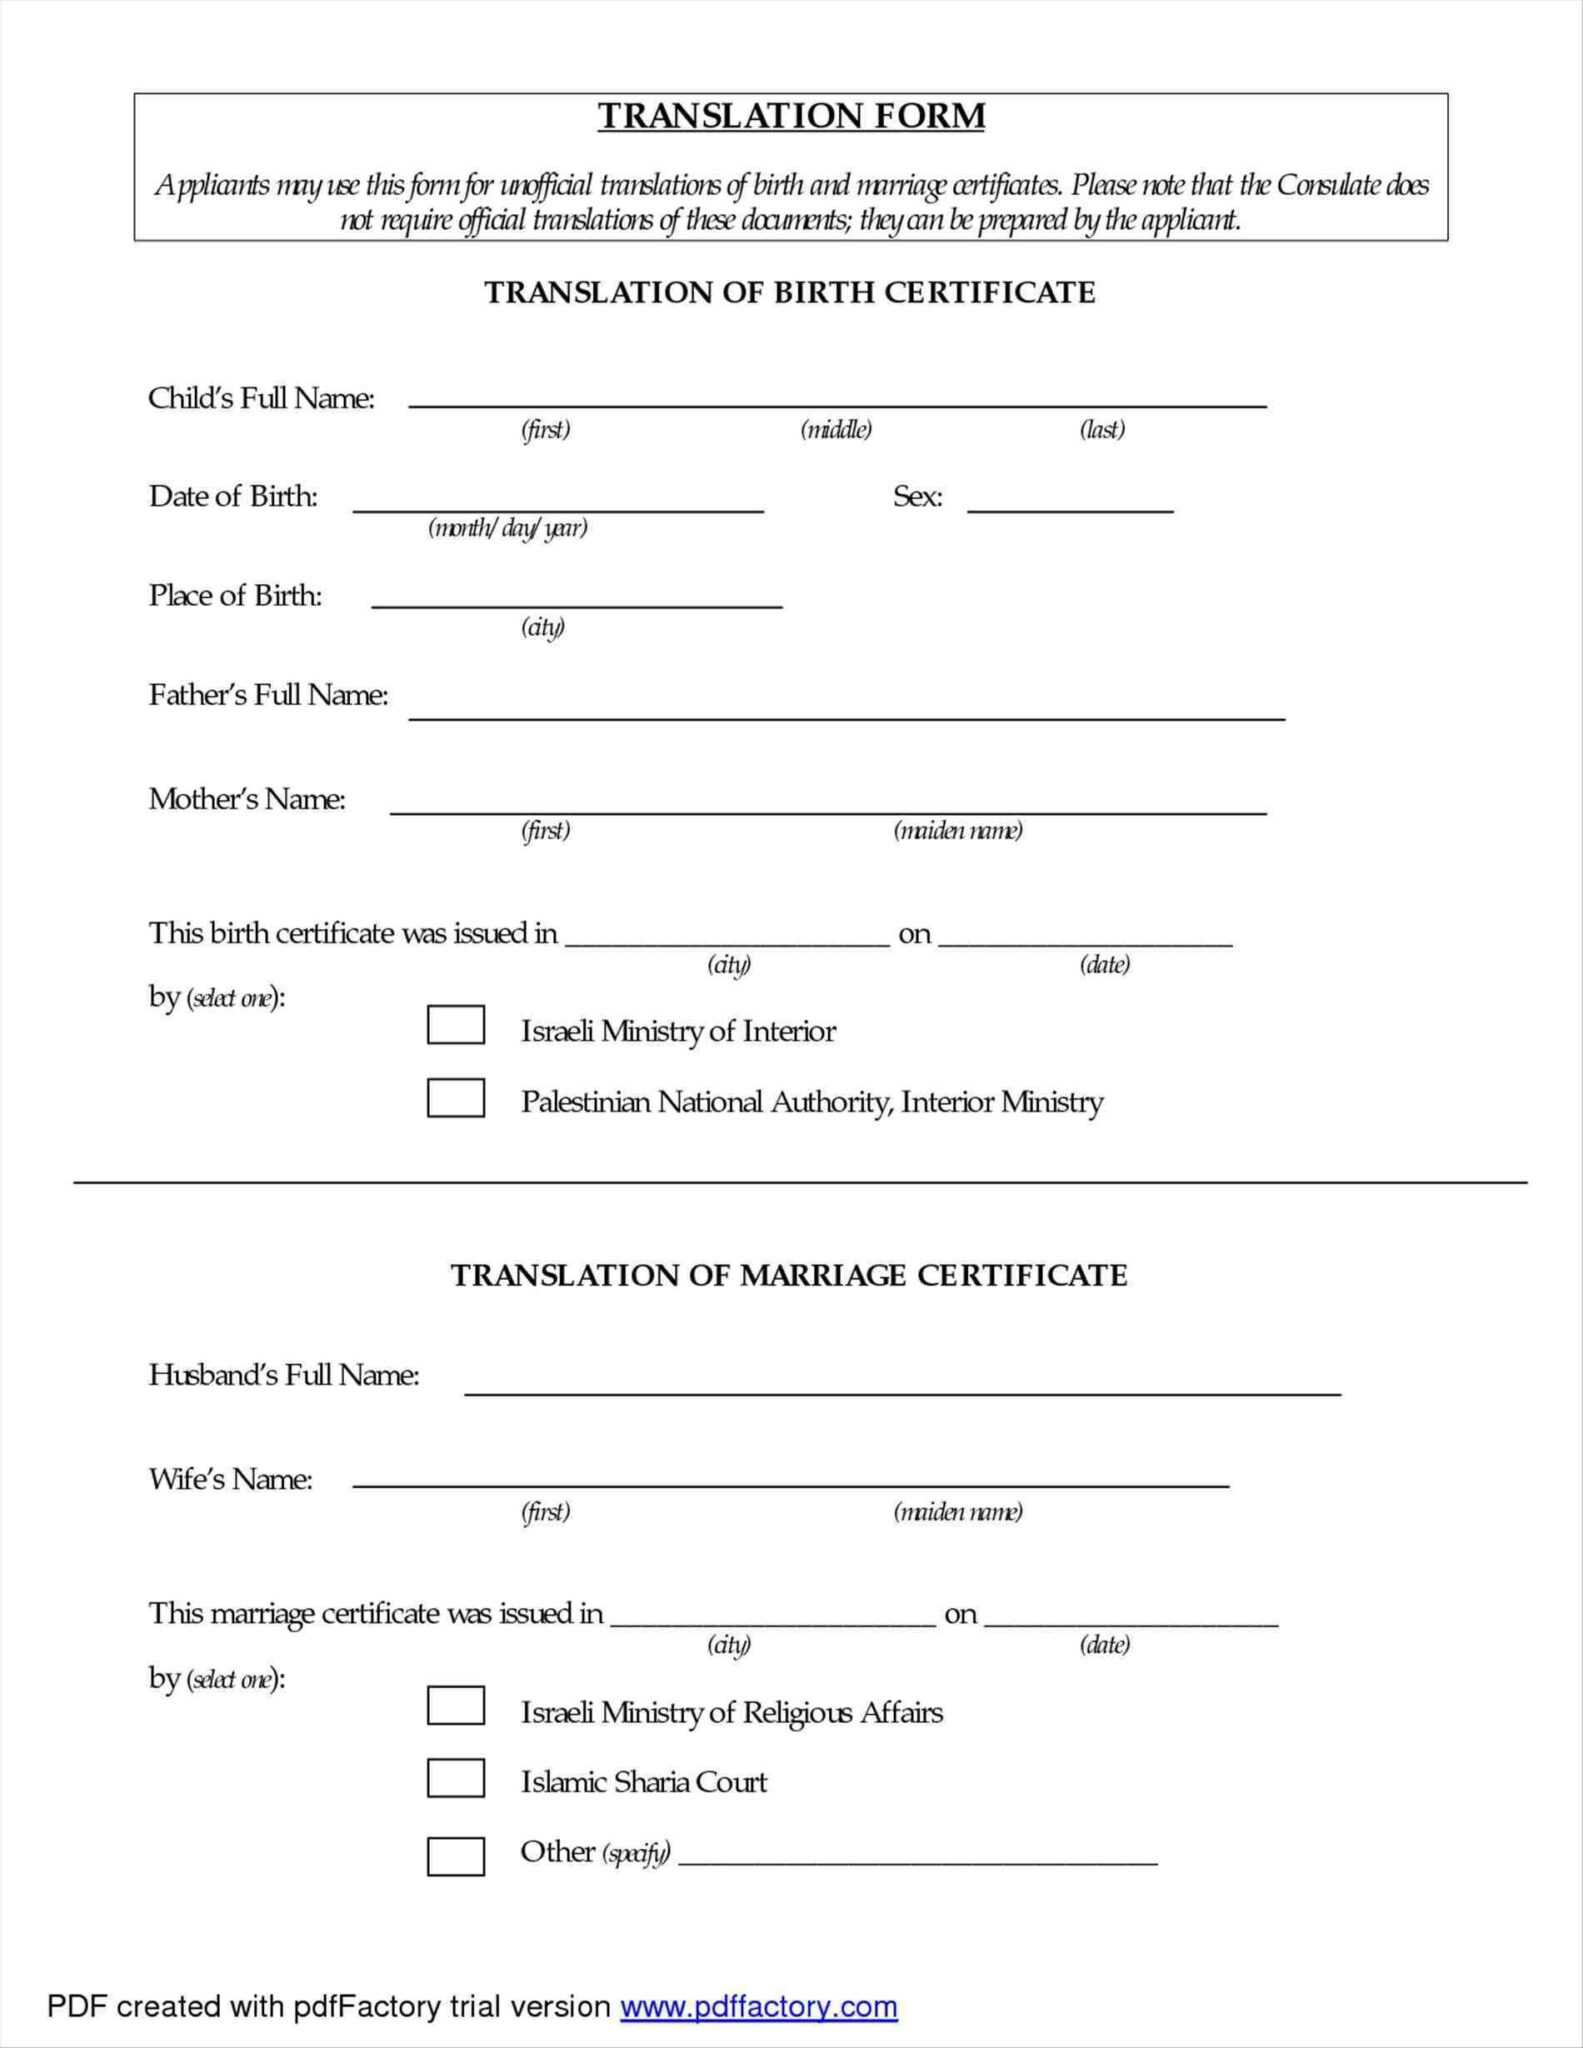 marriage-certificate-translation-template